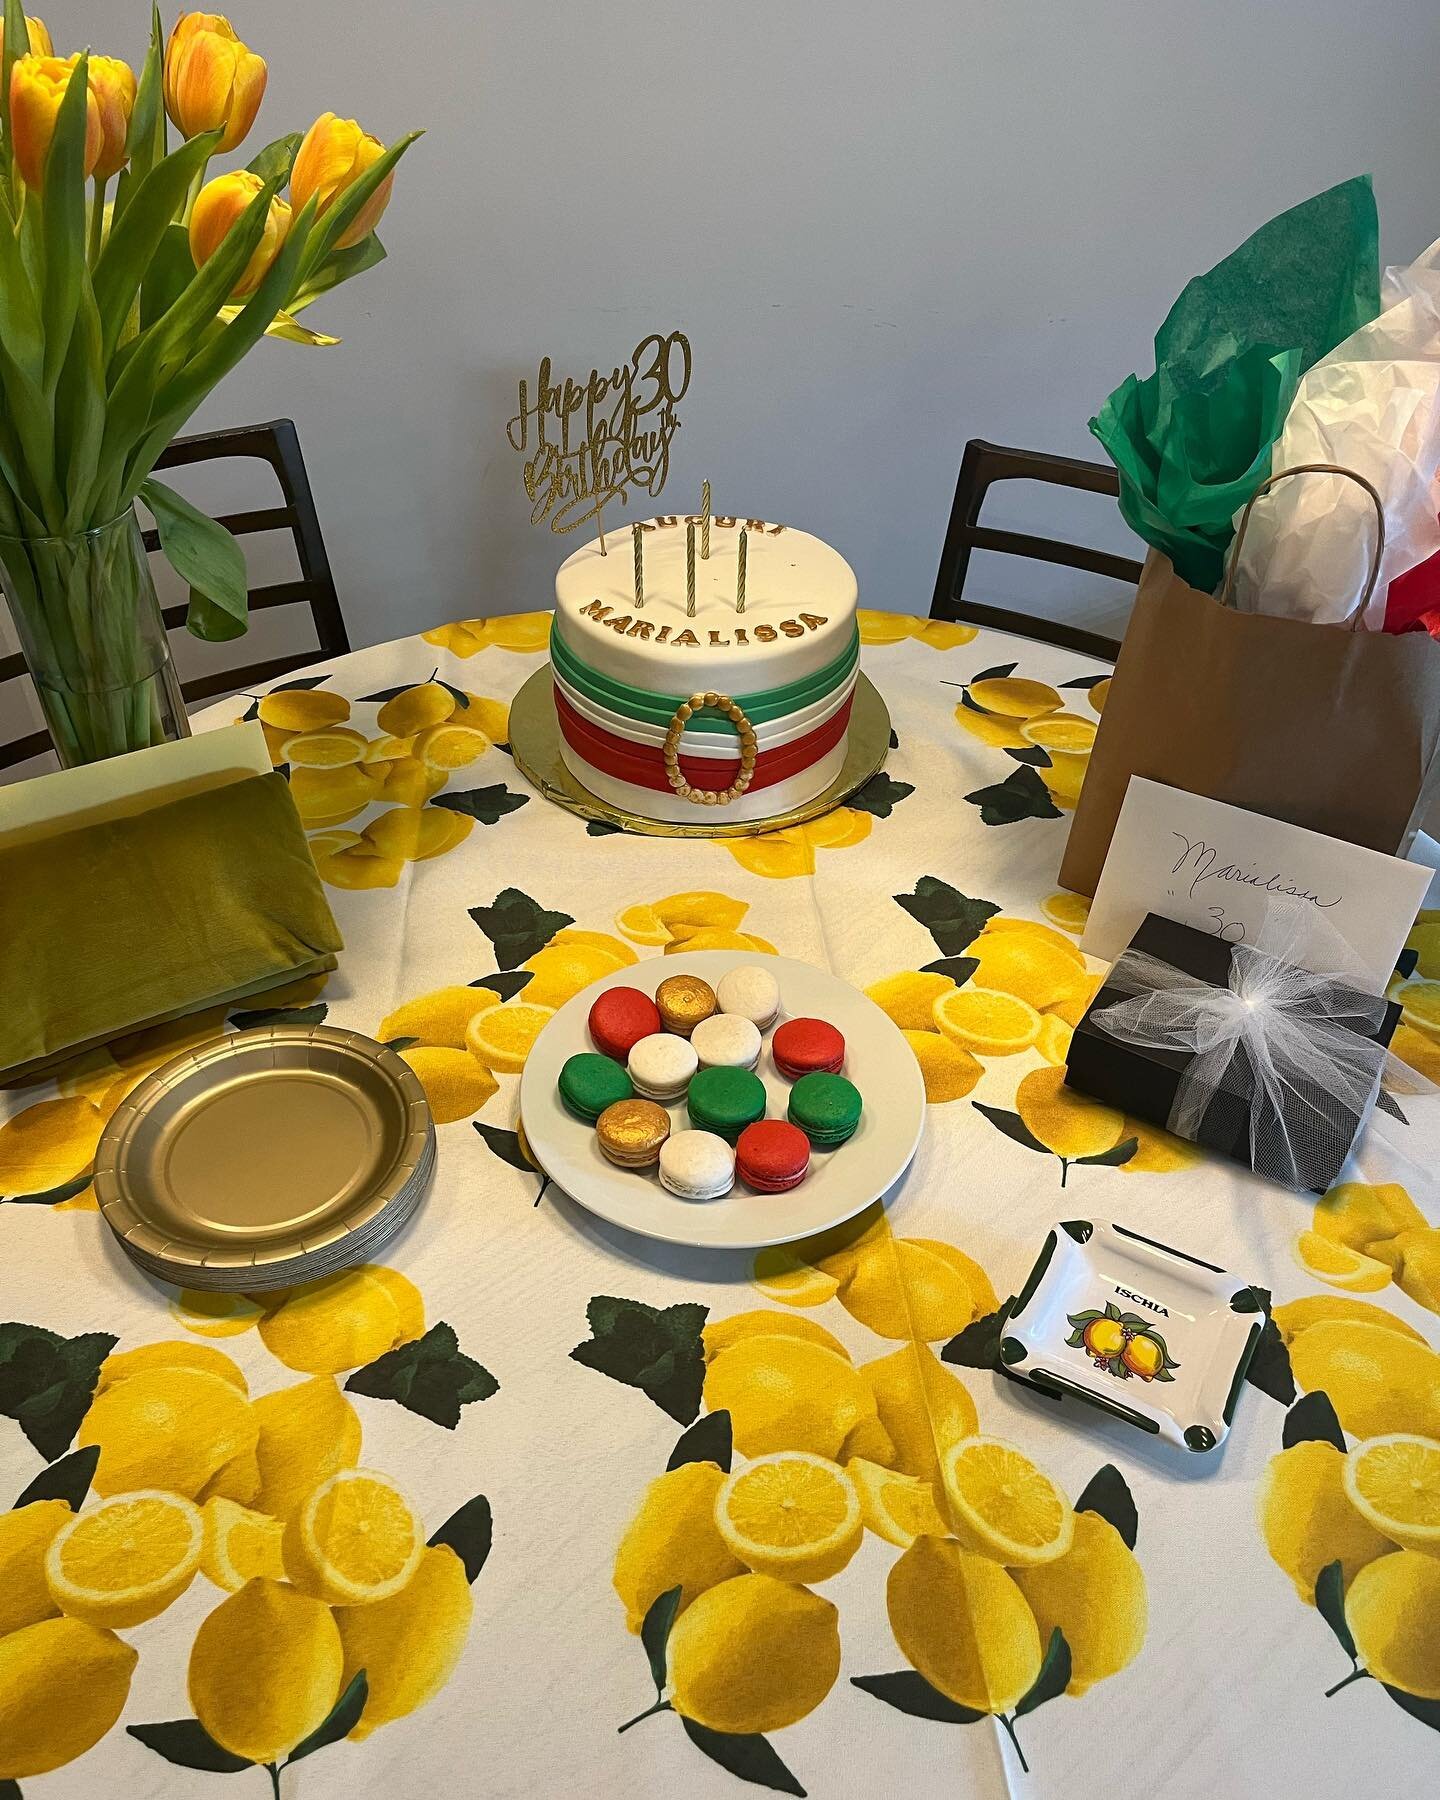 Saluti! 🇮🇹 Created an Italian inspired 30th birthday cake with layers of mocha mousse! Also had an assortment of Italian themed French macarons. 
.
.
.
.
#italianbirthdaycake🎂🥂 #30thbirthday #mochamoussecake #frenchmacarons #bostonpastrychefs #ca